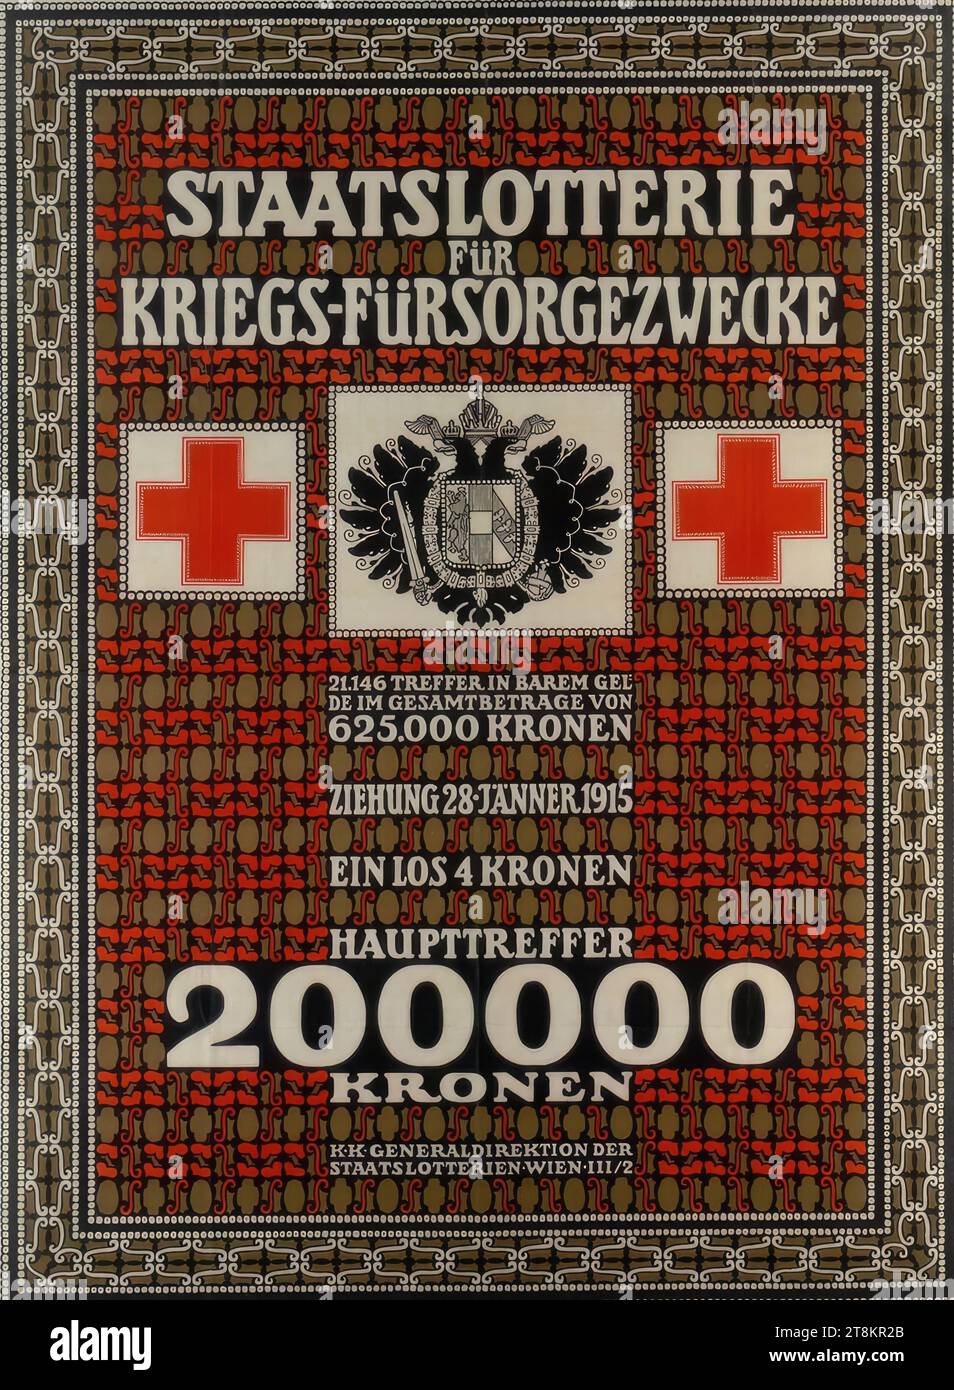 STATE LOTTERY FOR WAR PURPOSES; DRAWING JANUARY 28, 1915, Rudolf Junk, Vienna 1880 - 1943 Rekawinkel, 1915, print, color lithograph, sheet: 1260 mm x 950 mm, Austria Stock Photo